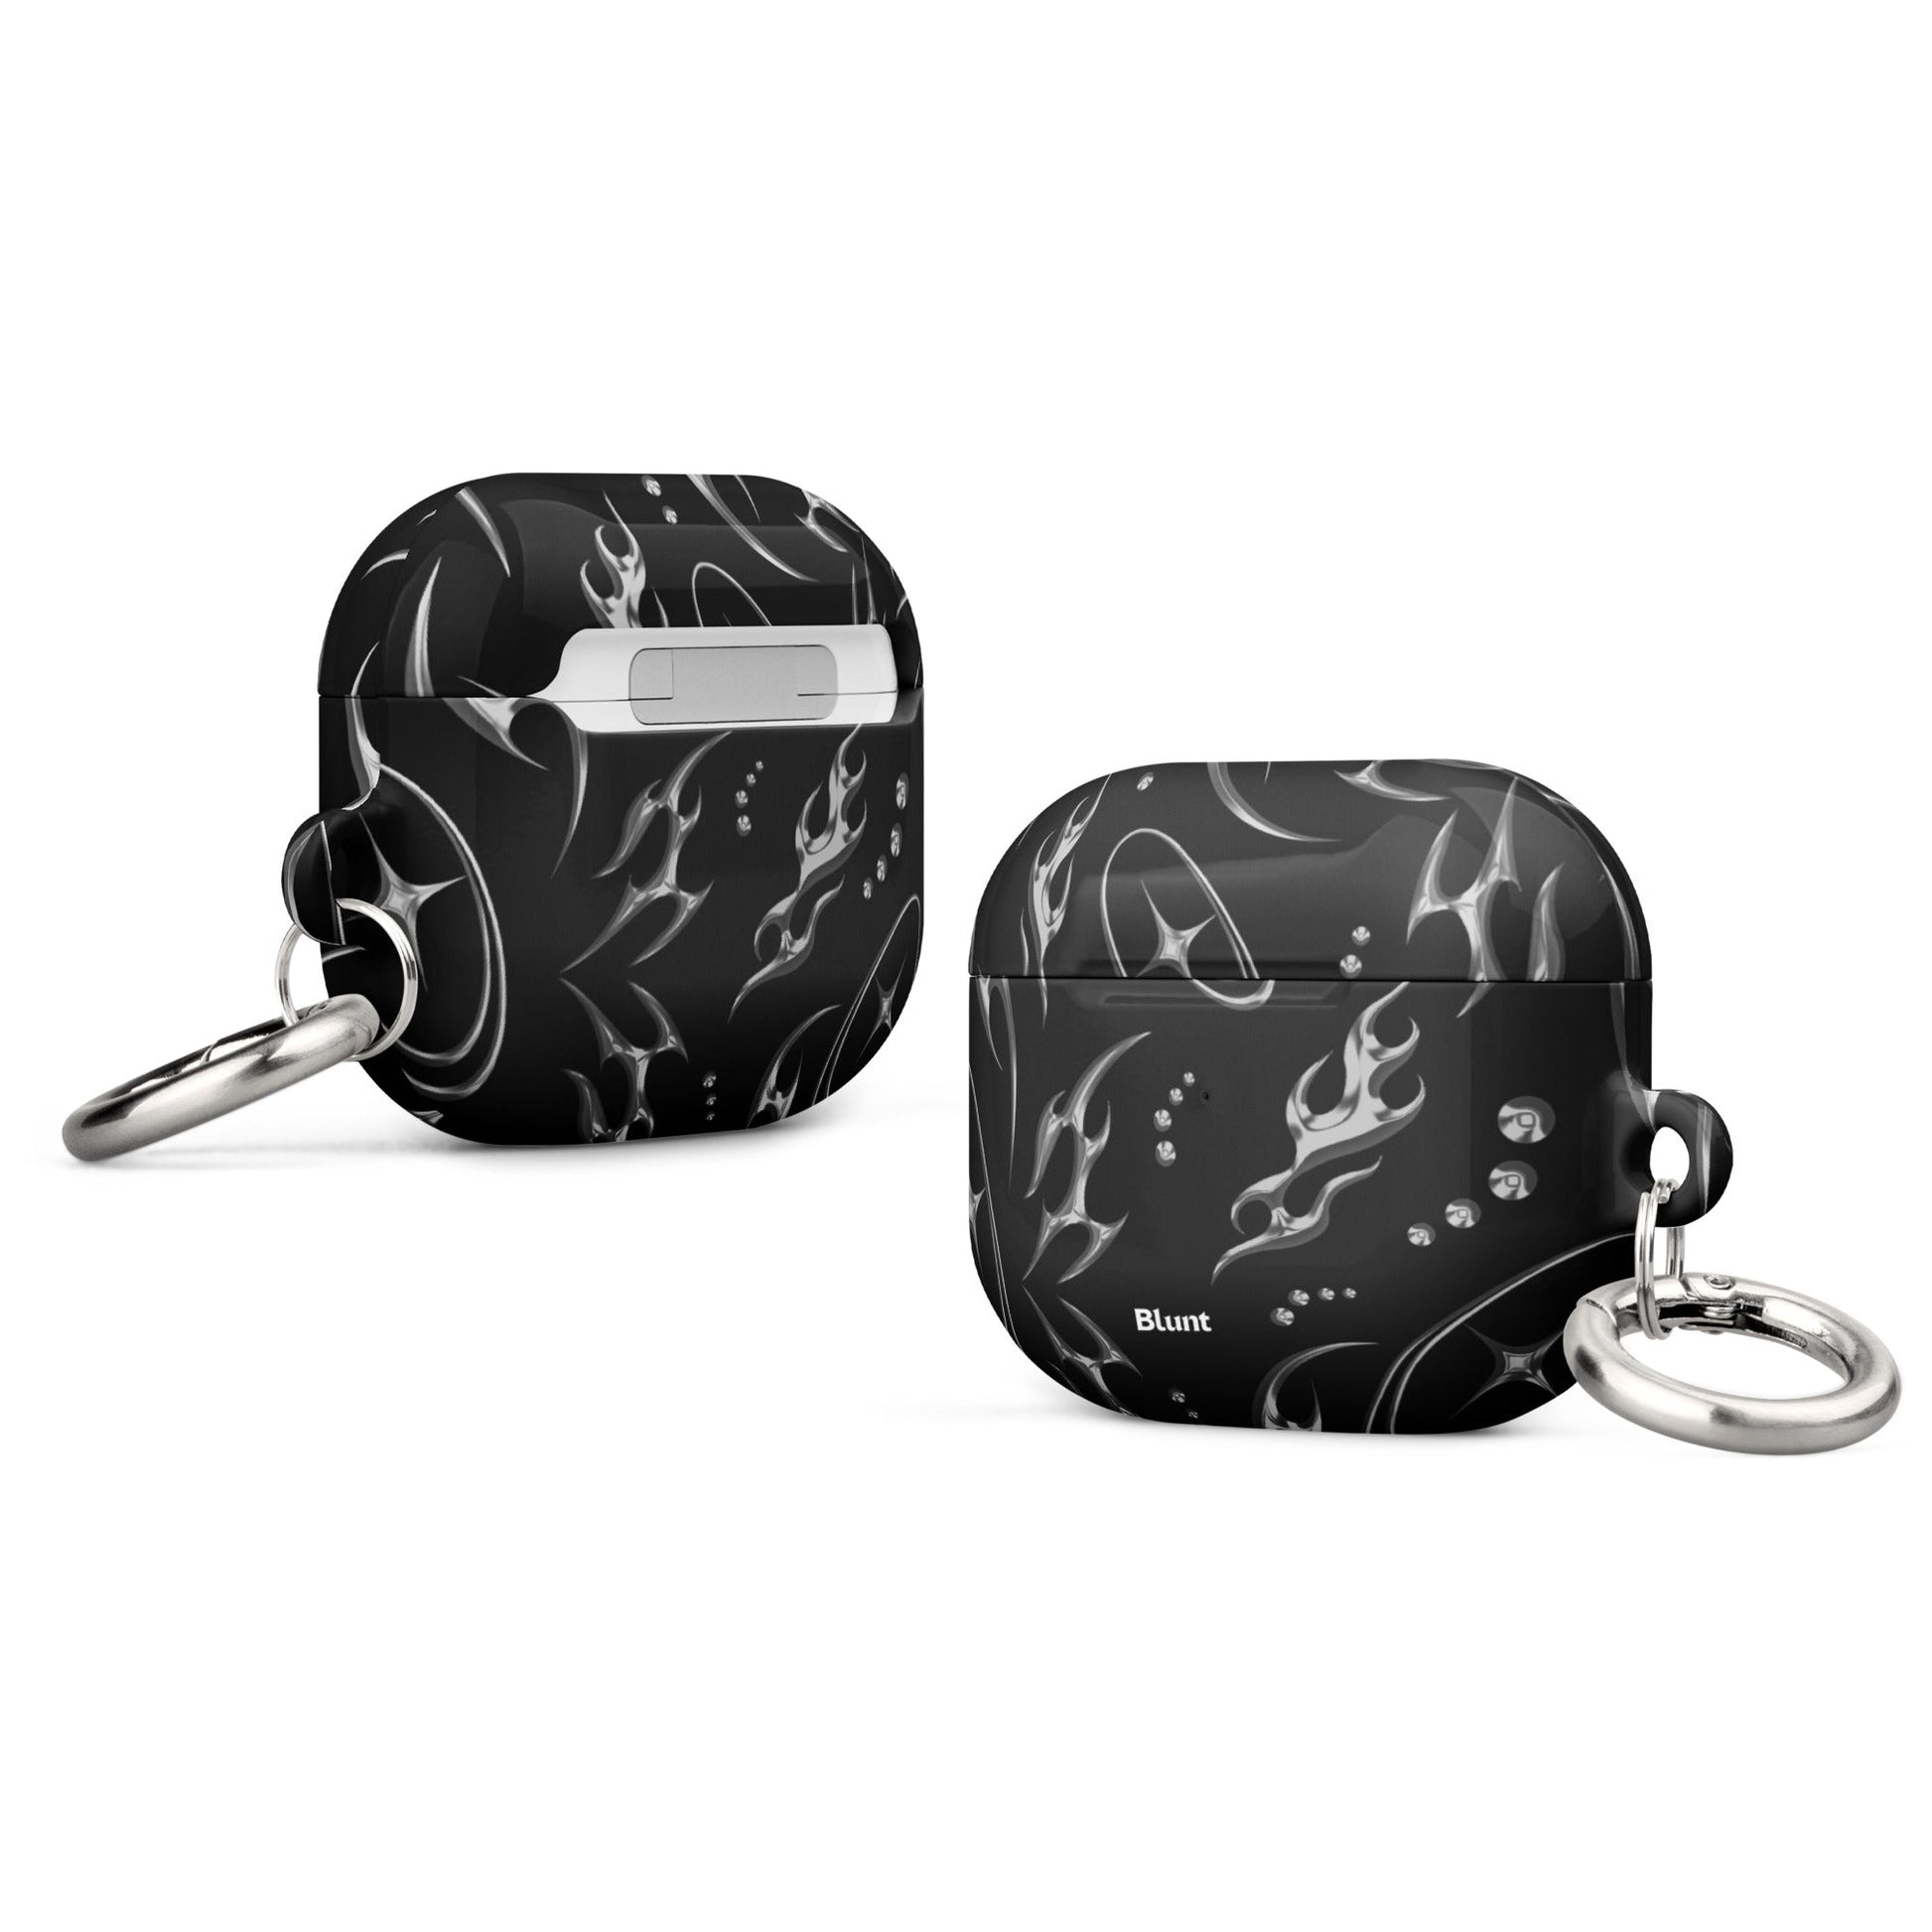 Cyber Airpod Case - blunt cases